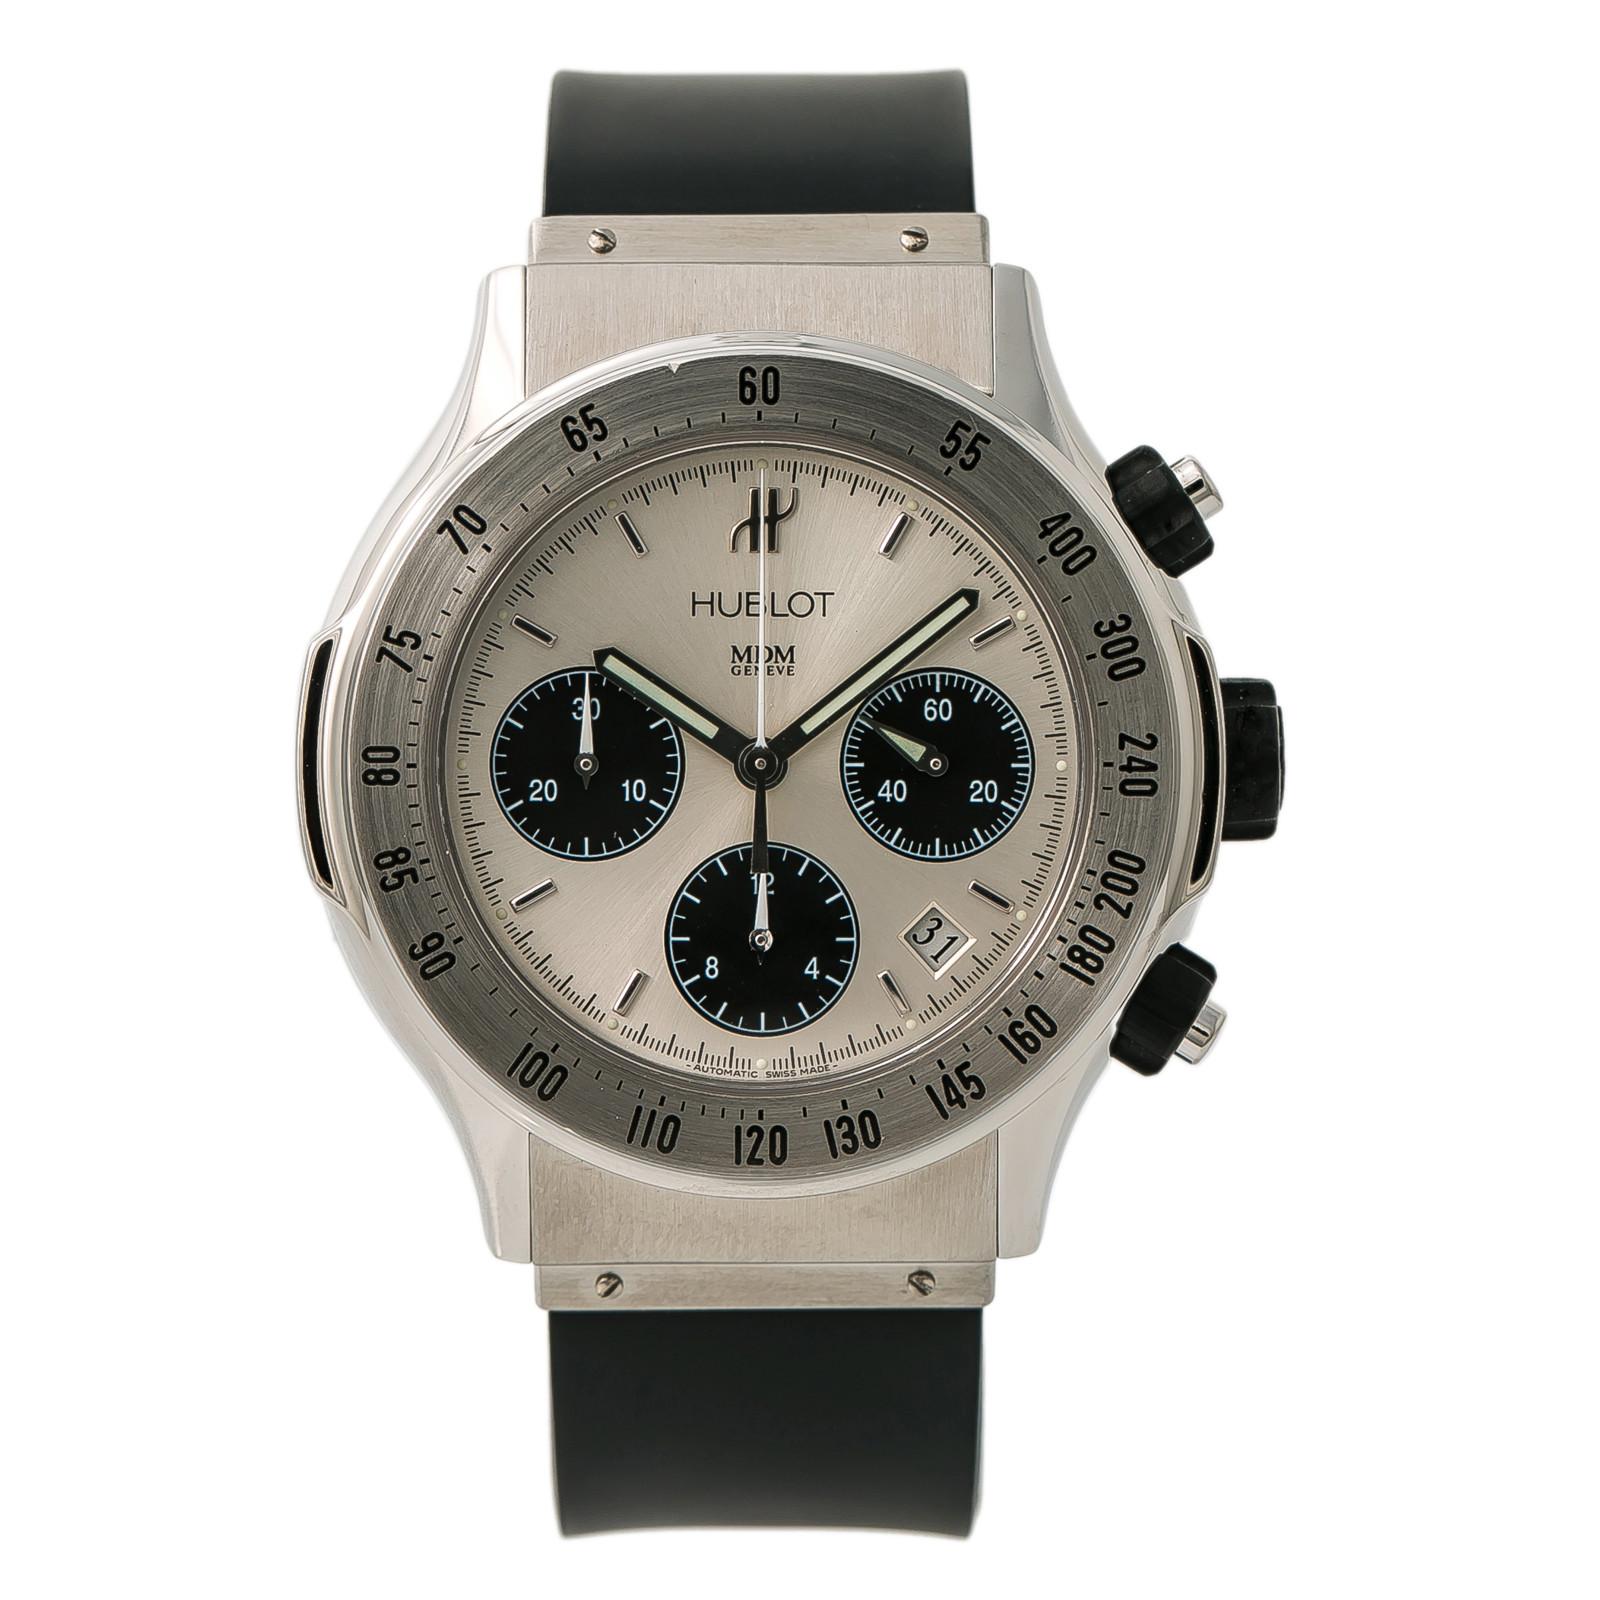 Hublot MDM 192.01, Silver Dial Certified Authentic